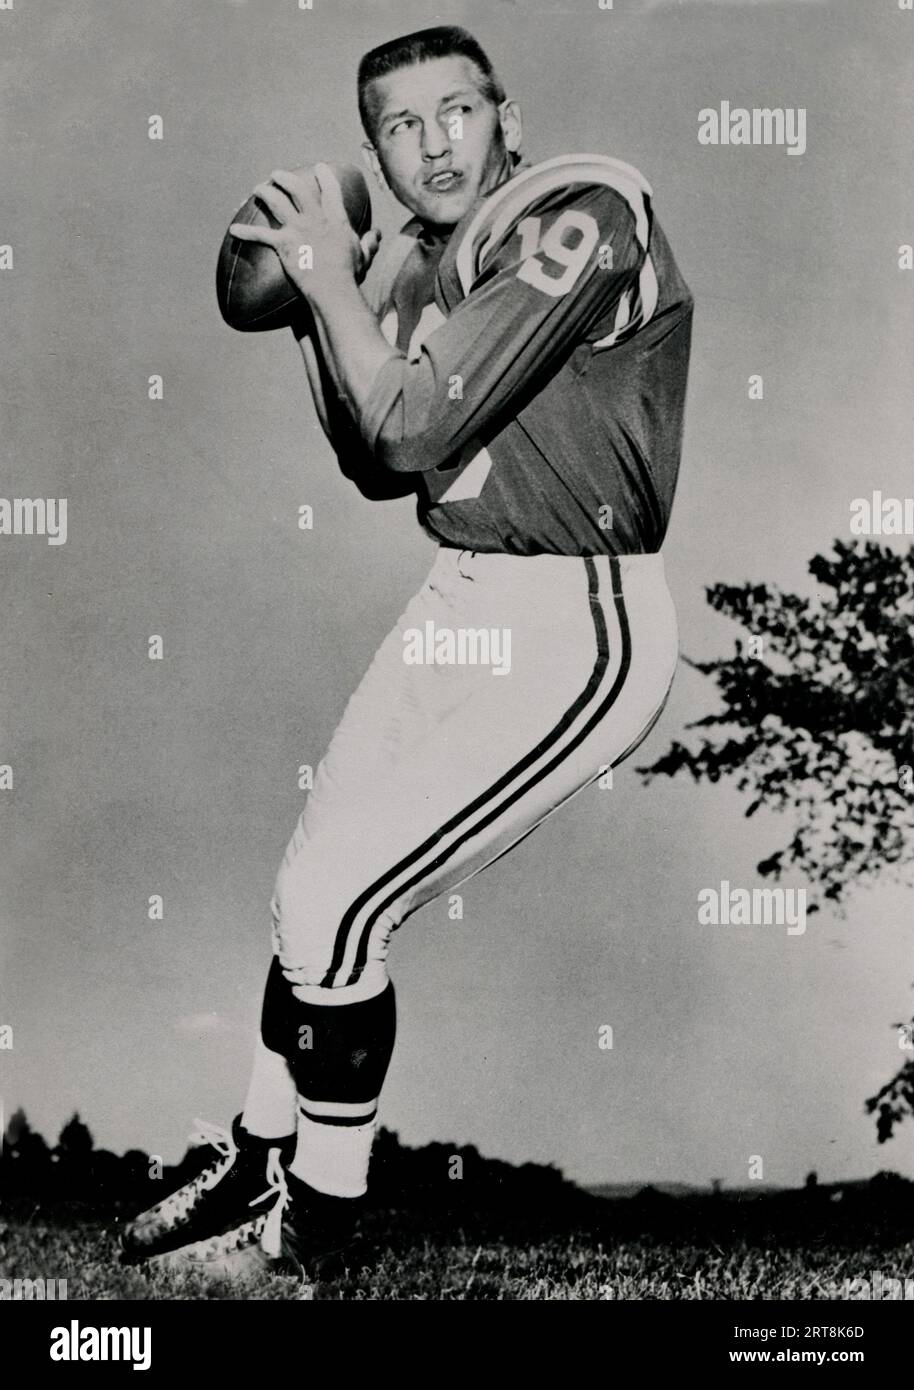 A publicity photograph of professional football quarterback Johnny Unitas who played with the Baltimore Colts from 1956 until 1972. Stock Photo